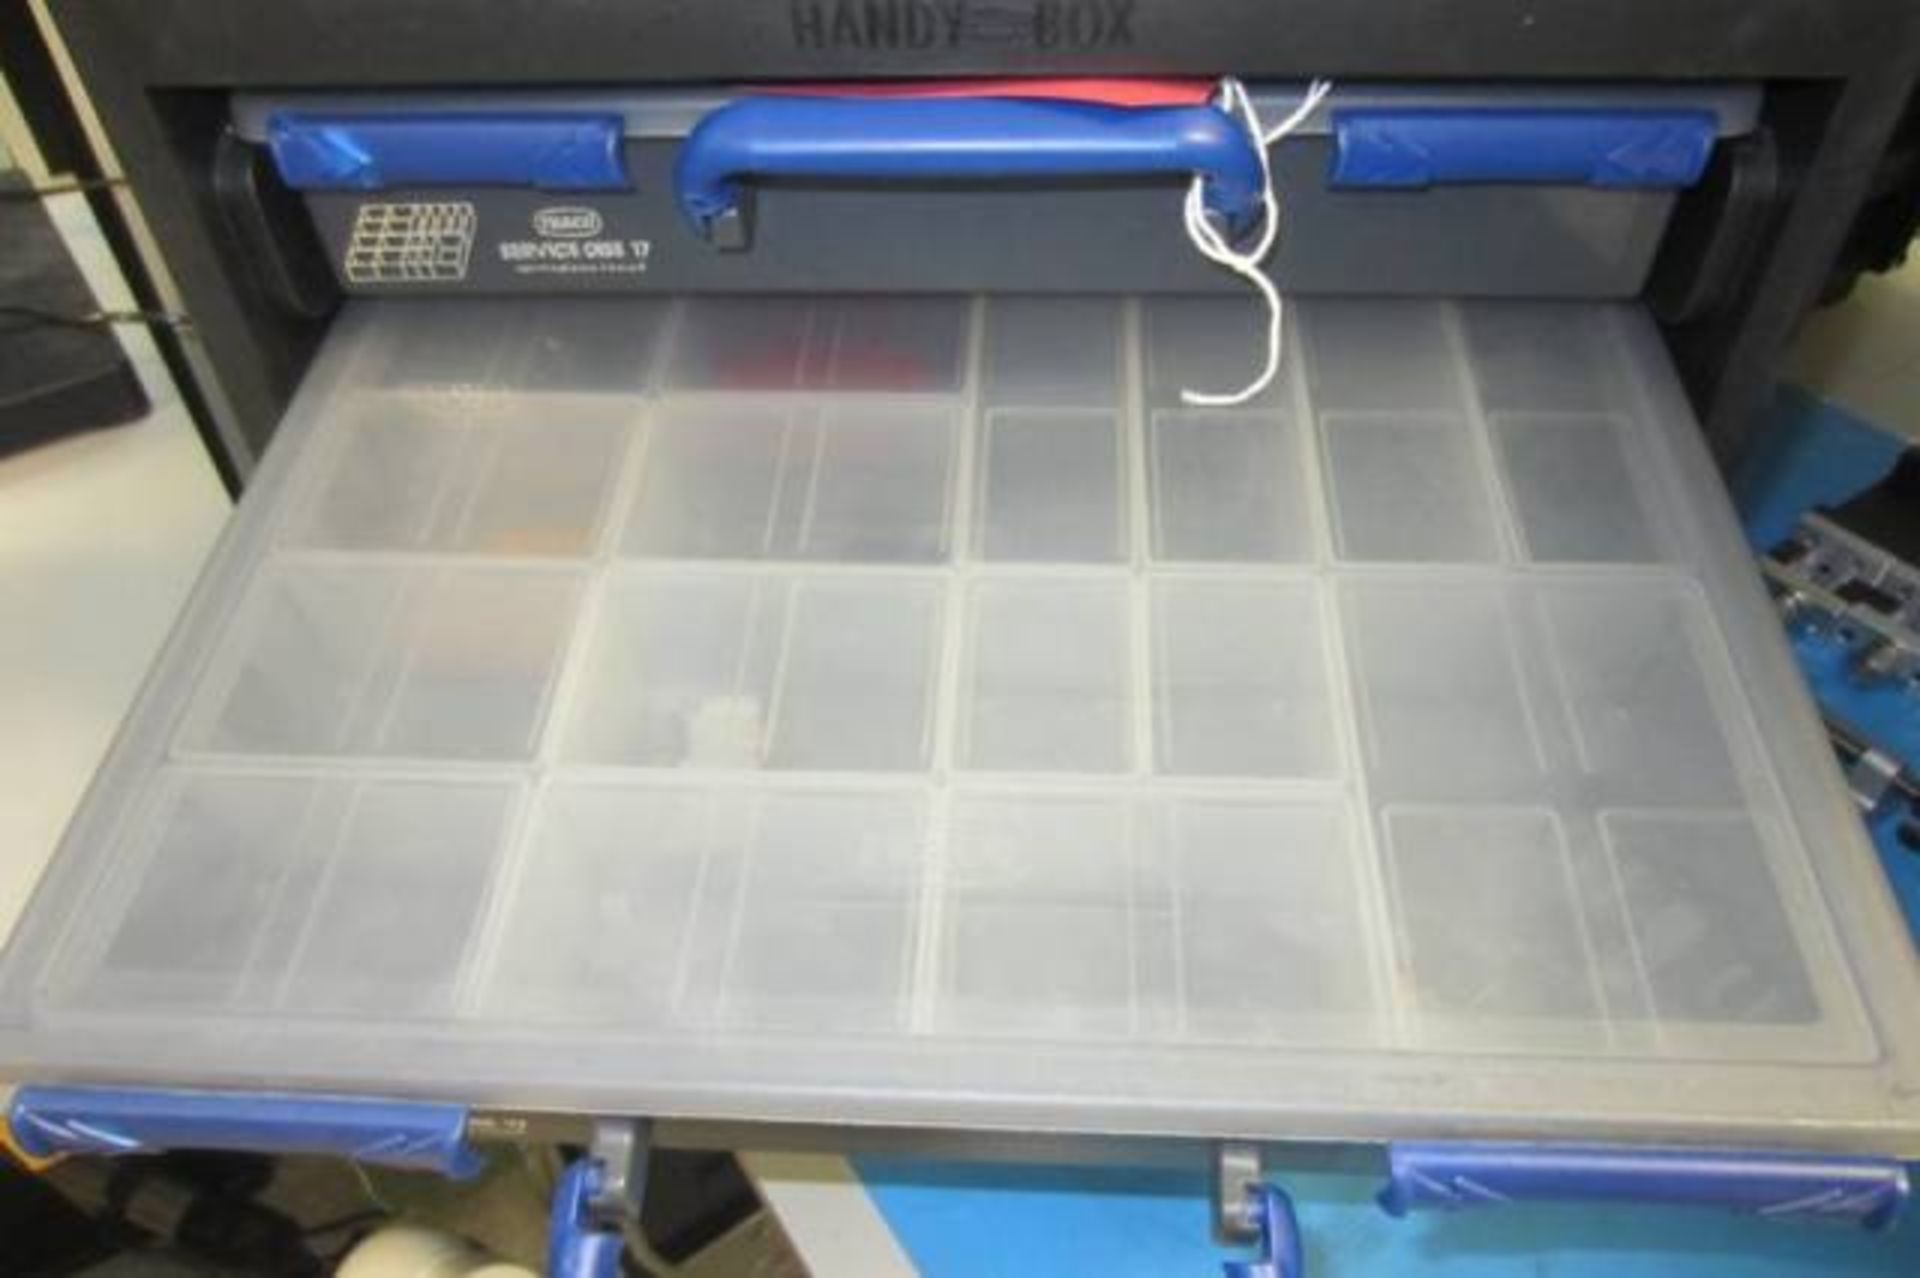 Handy Box 4 Drawer Component Compartments - Image 3 of 3